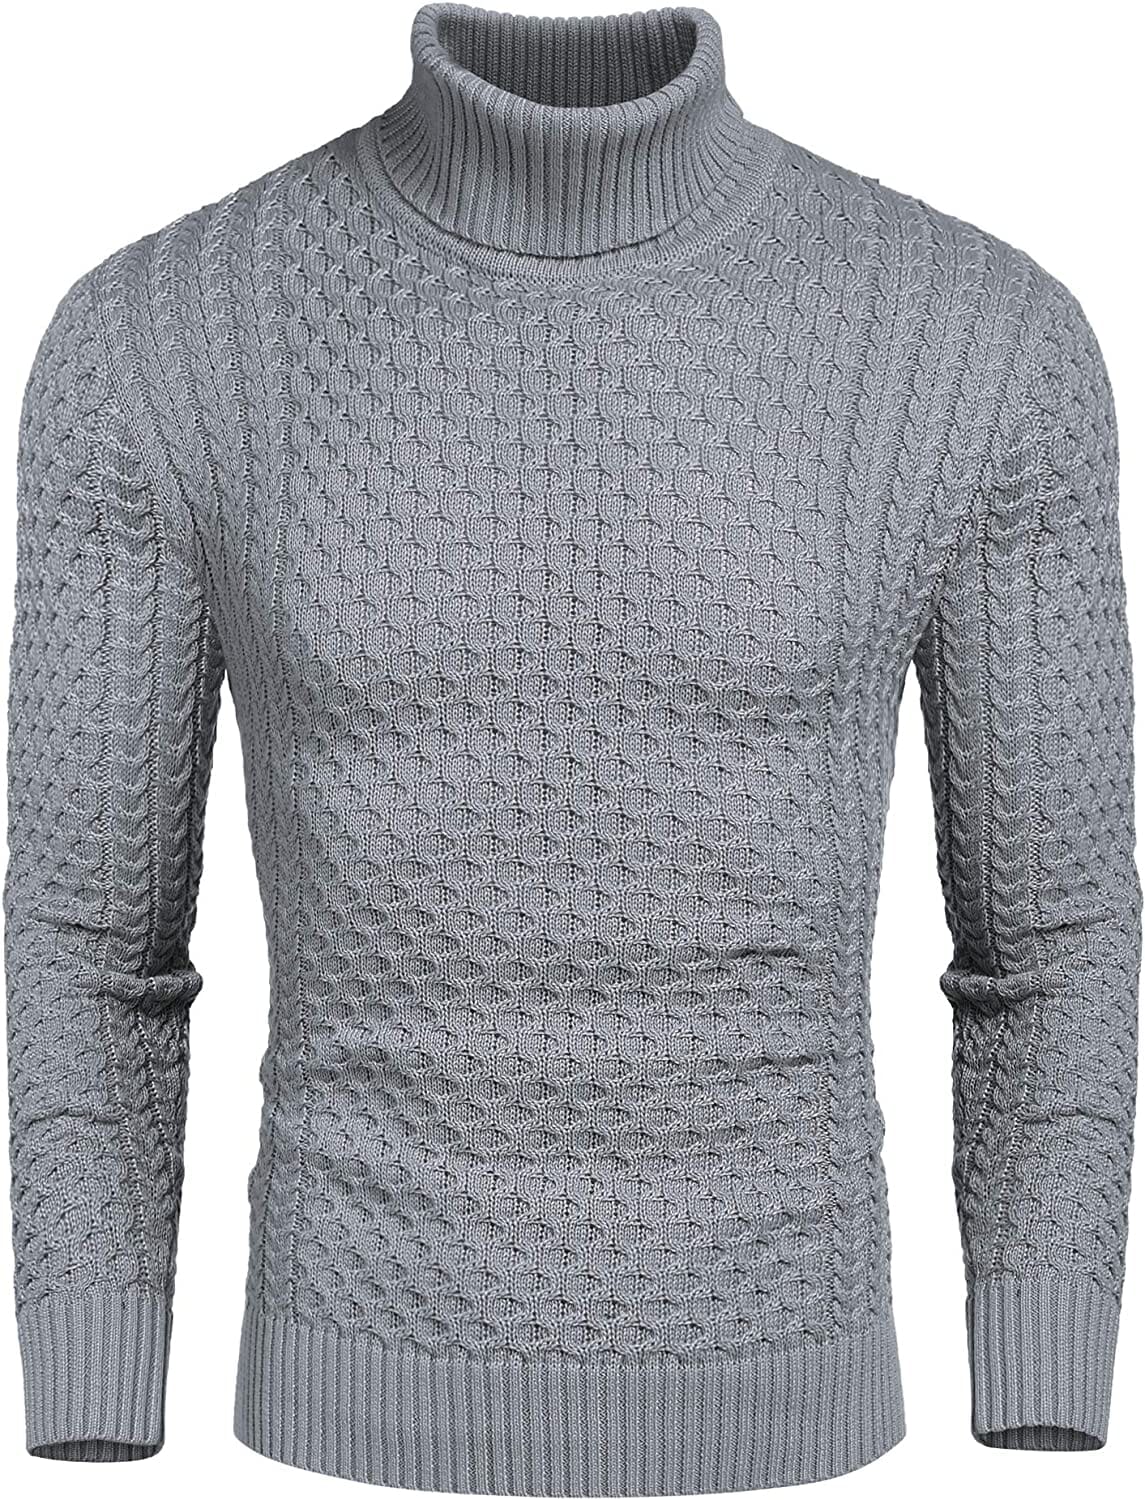 Slim Fit Turtleneck Knitted Twisted Pullover Sweaters (US Only) Sweaters Coofandy's Gray S 